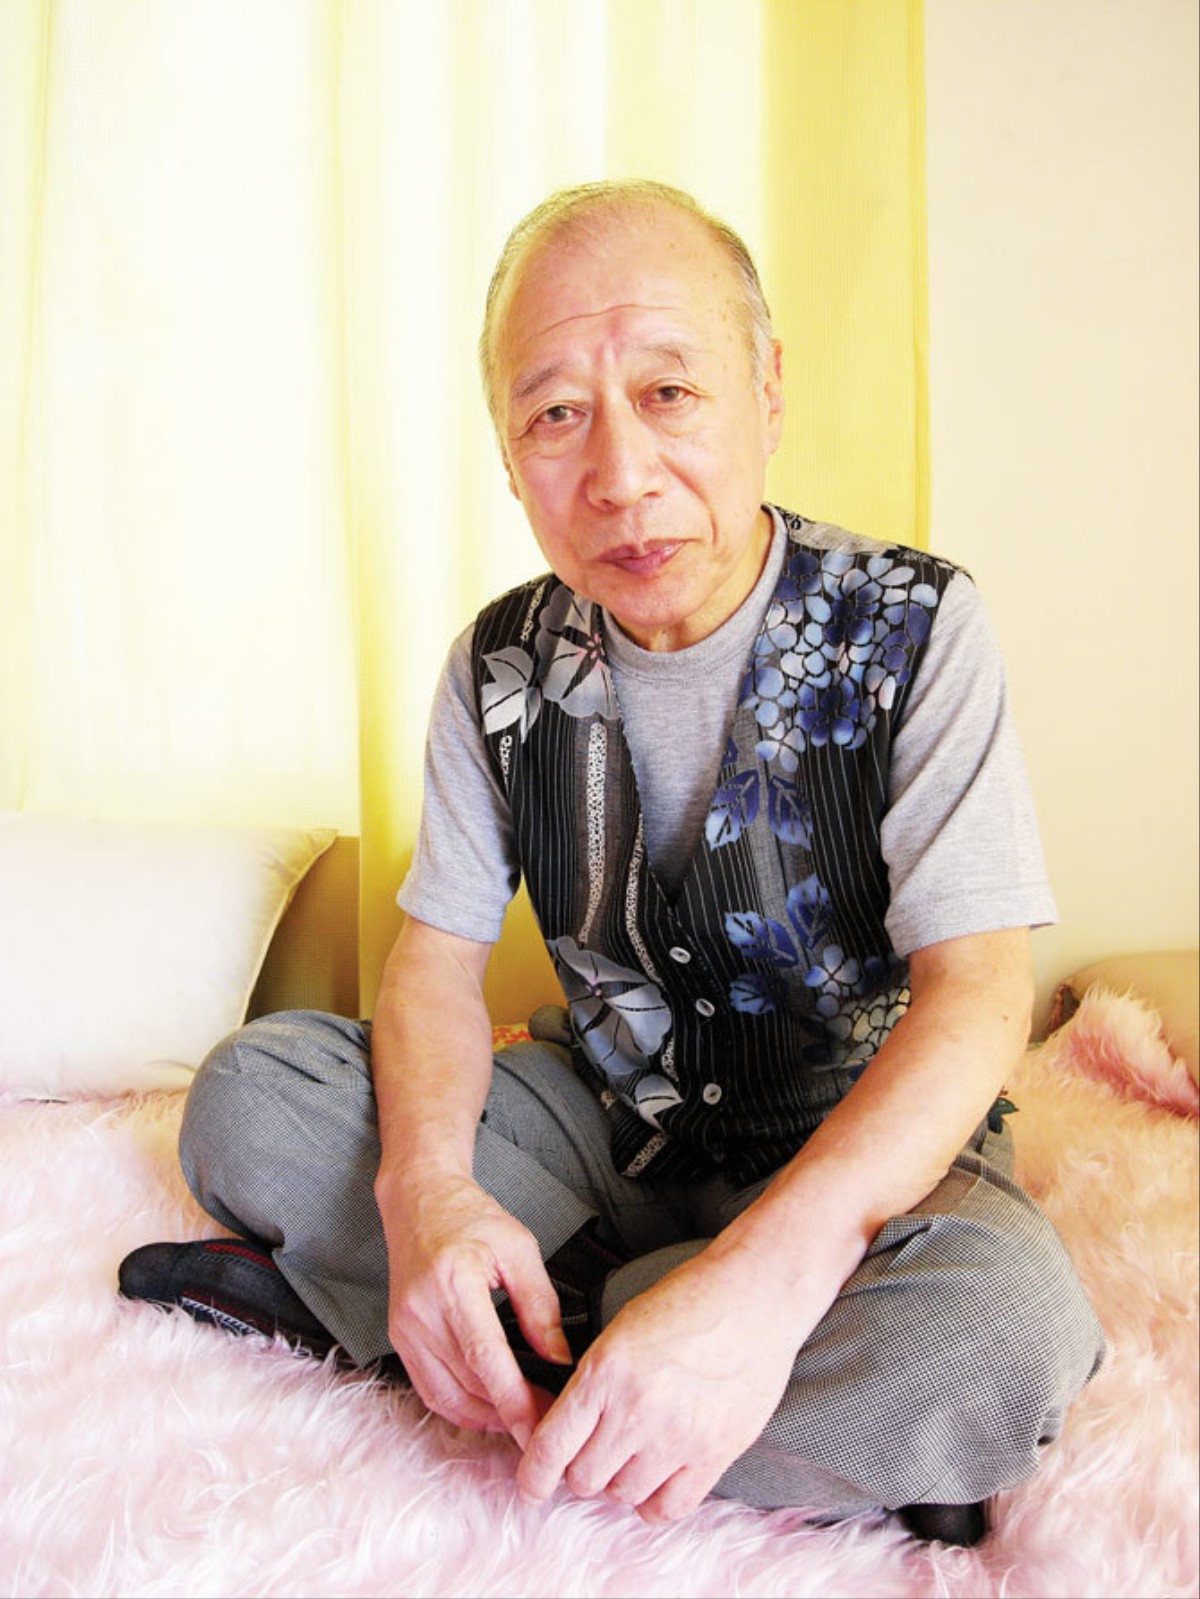 Old Men Porn Stars - A 74-year-old Japanese Porn Star - VICE